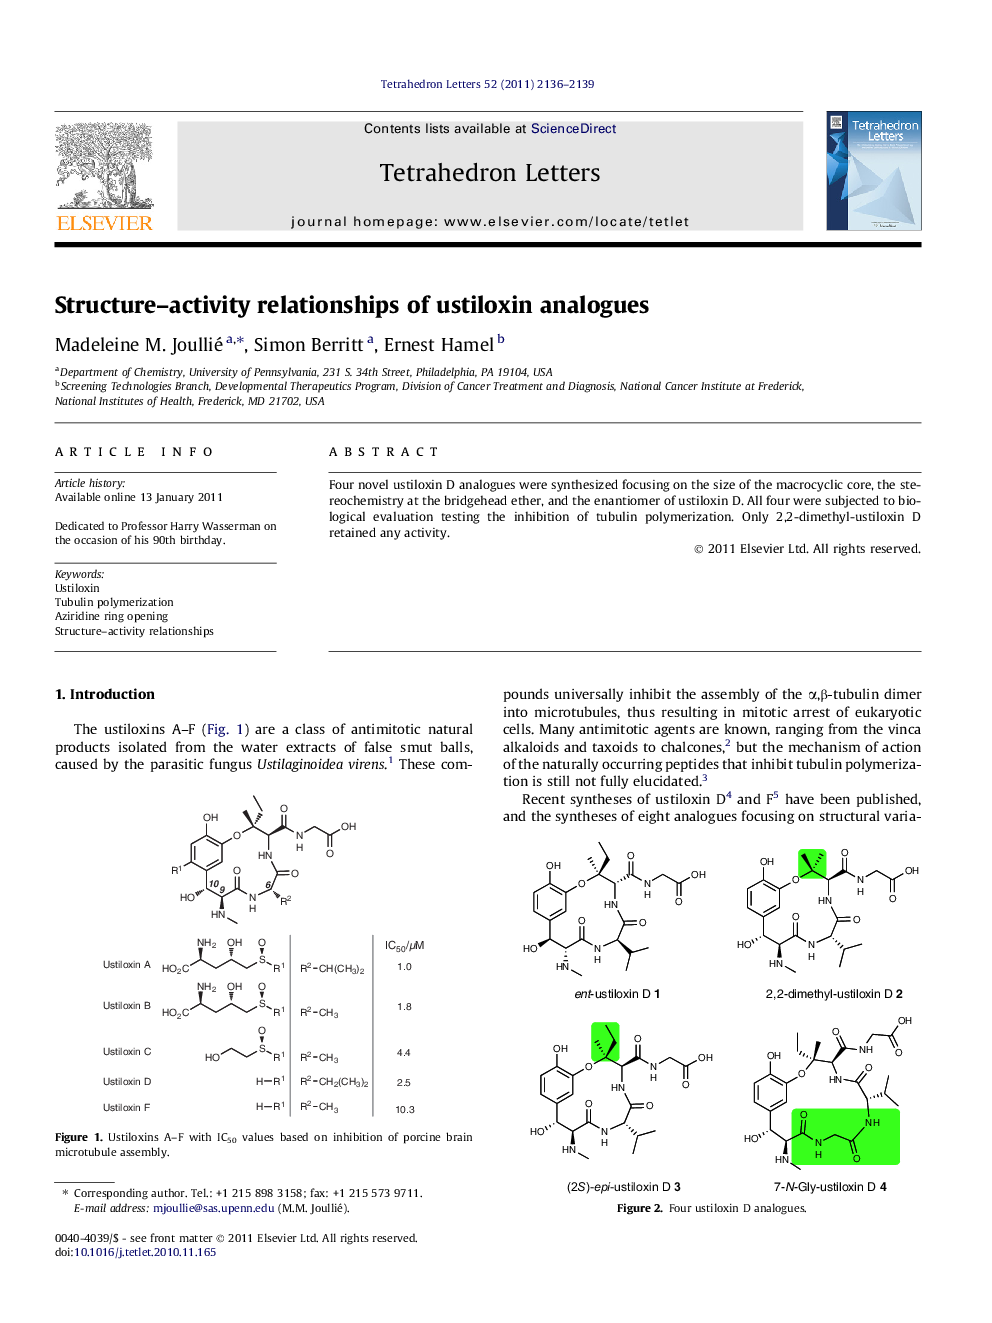 Structure-activity relationships of ustiloxin analogues